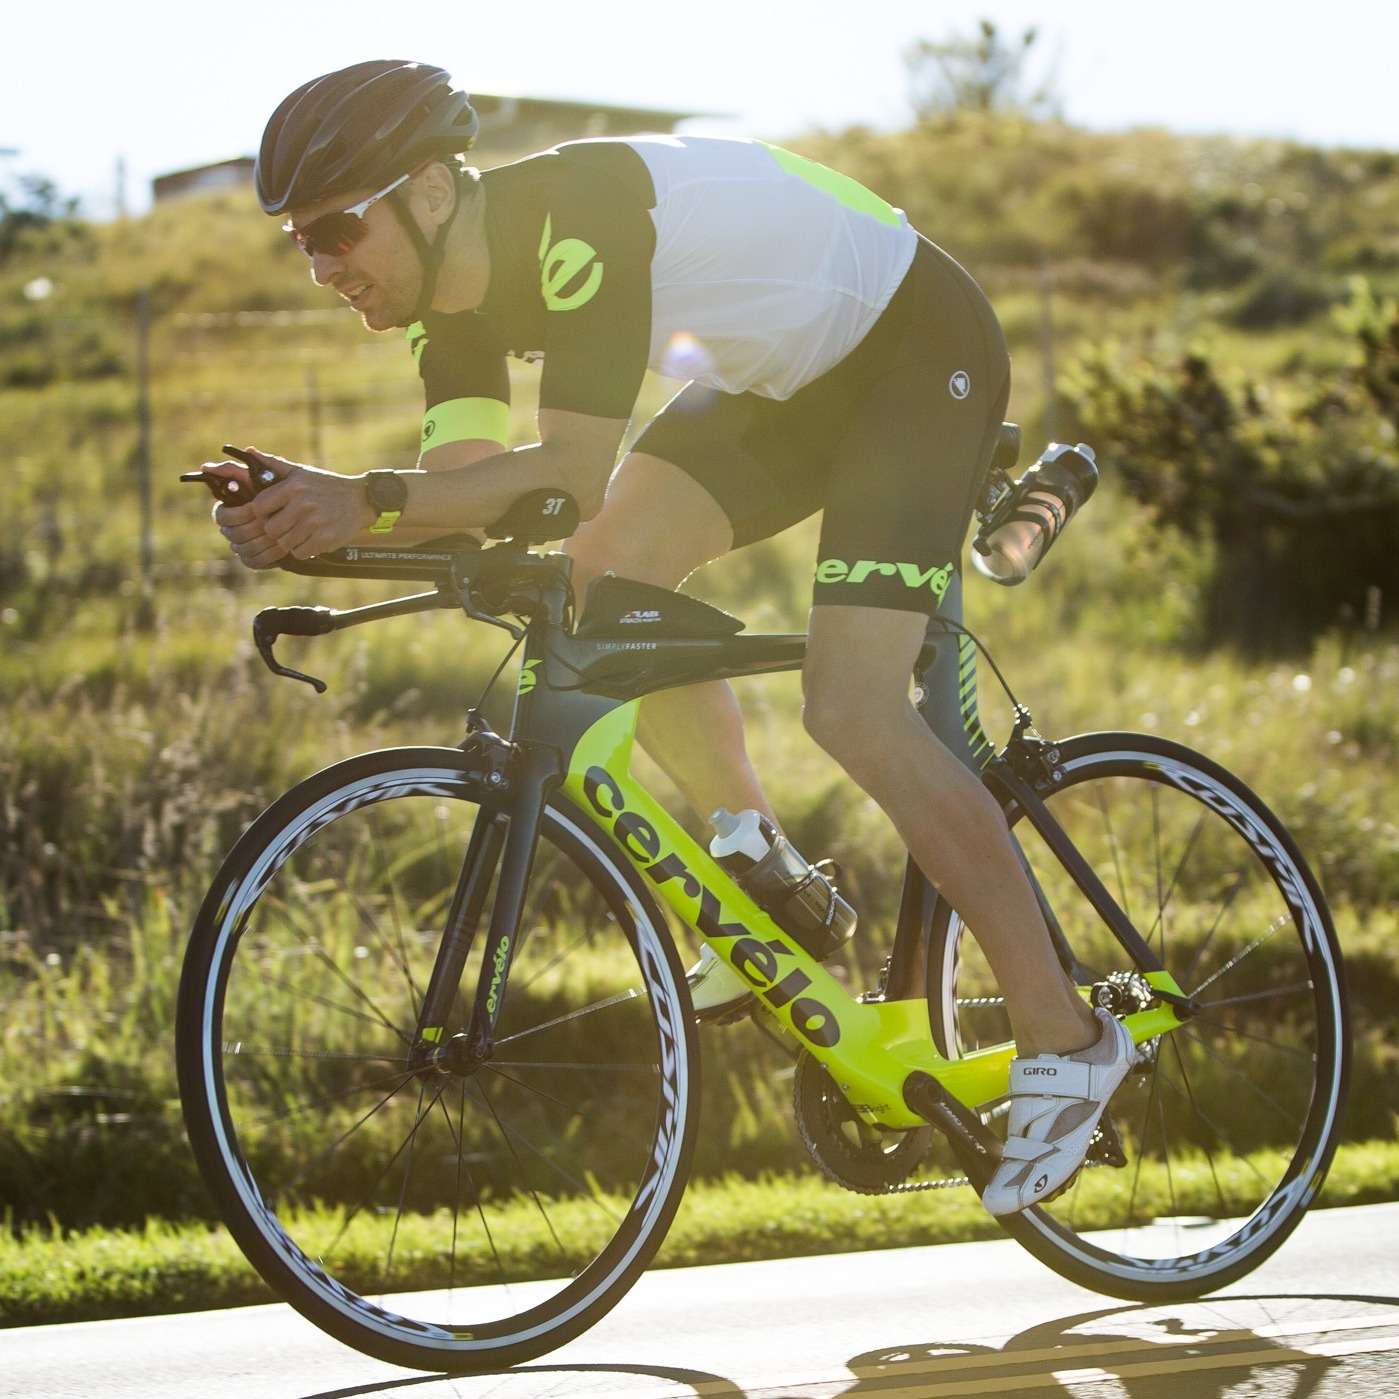 Image of a person riding a road bike in a triatholon